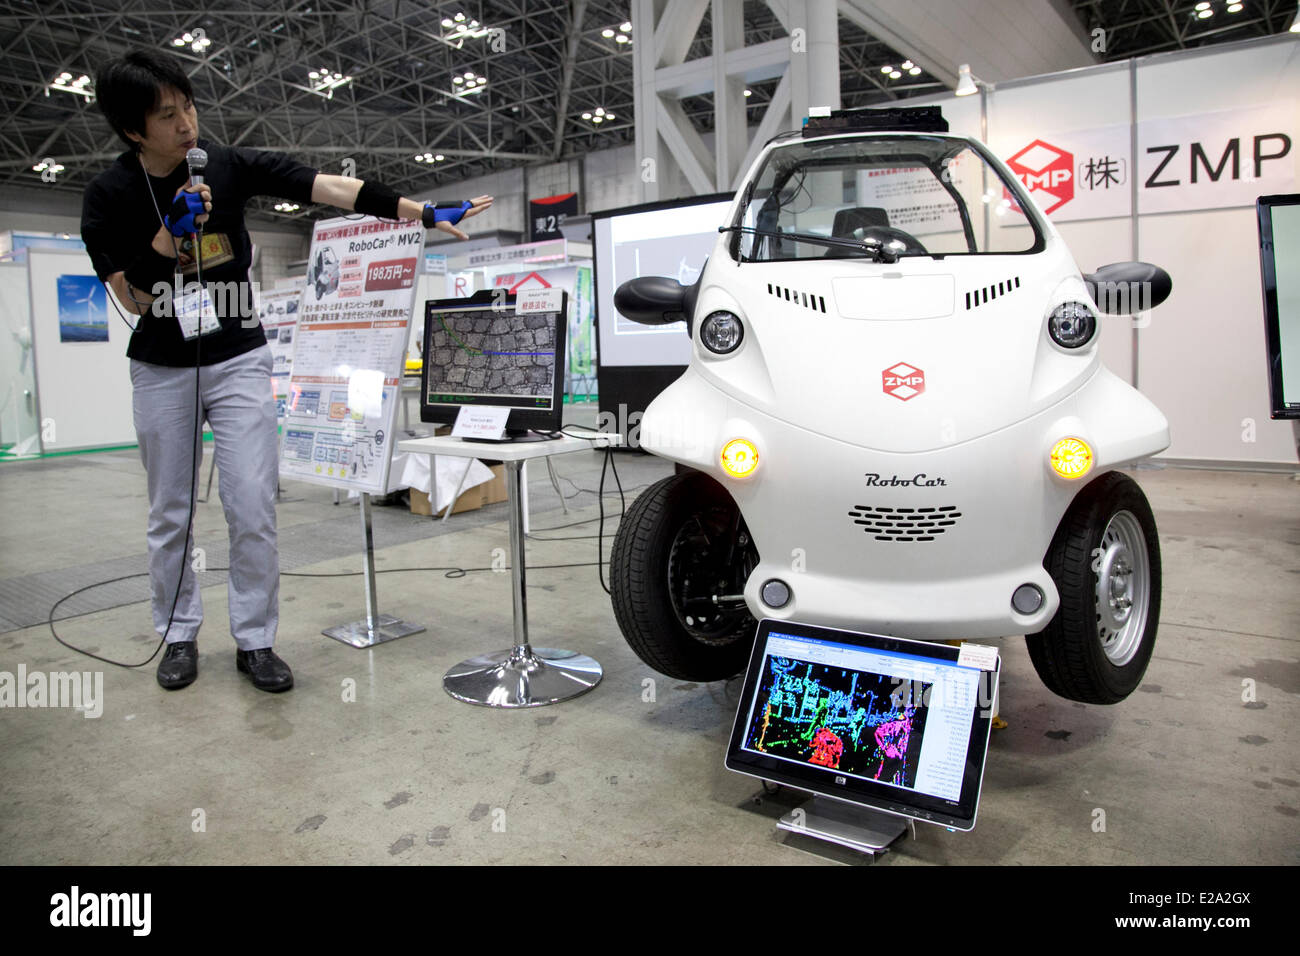 Tokyo, Japan. 18th June, 2014. An exhibitor shows the ZMP 'RoboCar' at the Smart Community Japan 2014 in Tokyo Big Sight on June 18, 2014. The exhibition brings the latests products and technologies divided in 5 categories, 'Smart Community Exhibition', 'Biomass Expo', 'Next Generation Vehicle Exhibition, and newly-created 'Community Cloud 2014', which introduces technology for urban development. This year 229 enterprises and organizations shows their products from June 18th to 20th. Credit:  Aflo Co. Ltd./Alamy Live News Stock Photo